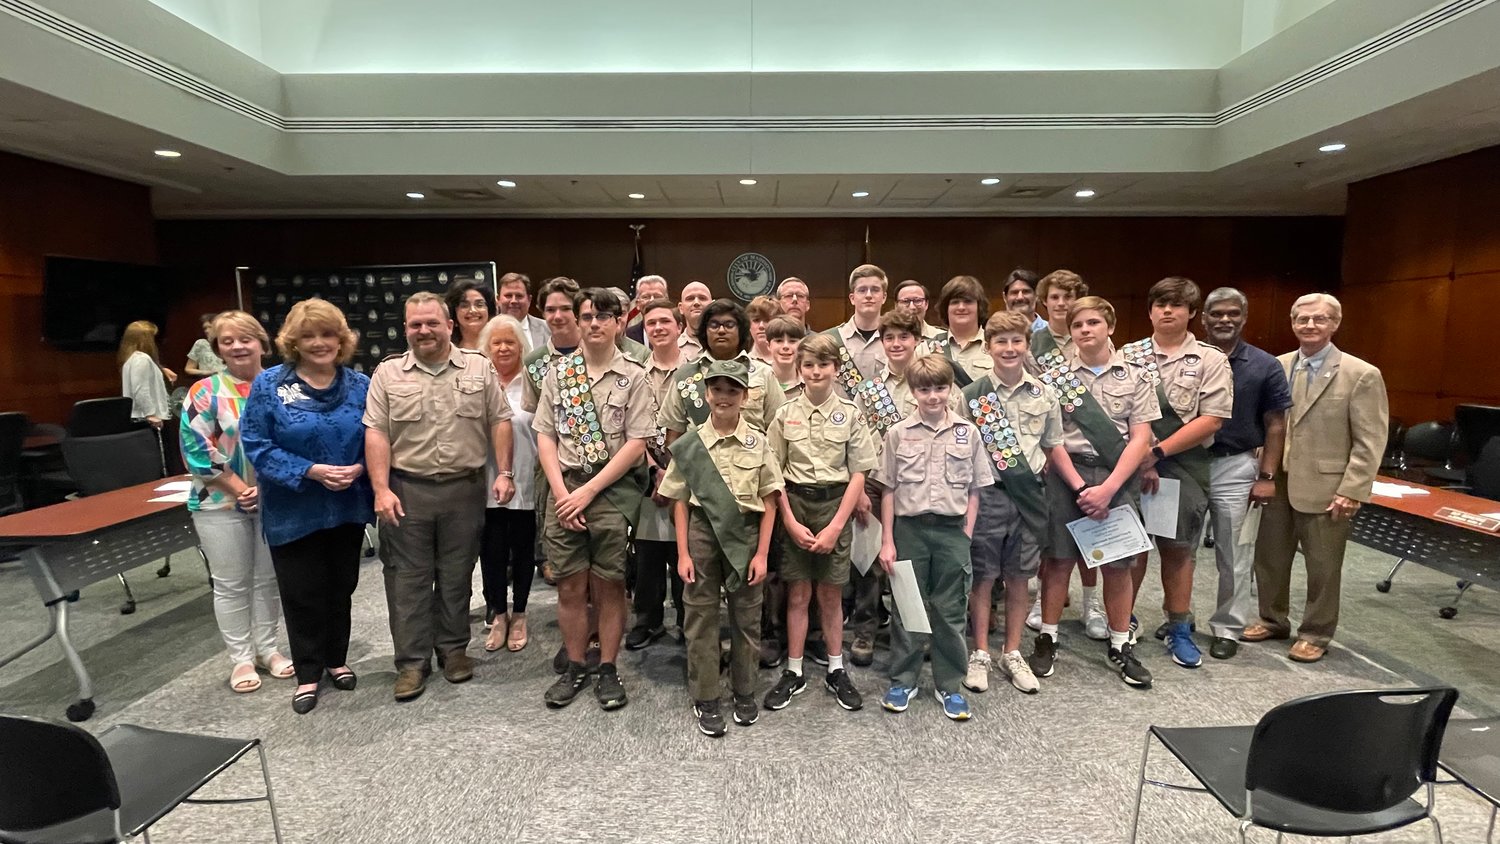 Scouts from Troop 15 in Madison were recognized for their service to the city of Madison by cleaning Brashear Creek and planting flowers in the botanical garden in front of the Montomgery House on Main Street. Pictured, from left: Alderman Janie Jarvis, Mayor Mary Hawkins-Butler, Scoutmaster Matthew Thompson, Skylar Gentry, Nick LaFluer, Will Thompson, Matt Caudell, Assistant Scoutmaster, Partha Yerra, George Parmley, Ryco Muha, George Barnett, Edward Sanders, Assistant Scoutmaster, Henry Neukirk, Drew Tucker, Whitt Deming, Henry Barnett, Chandler Tipton, Assistant Scoutmaster, Nick Tucker, Max Sanders, Michael Gentry, Assistant Scoutmaster, Logan Adams, Jacob Caudell, Wilson Caudell, Vijay Yerra, Assistant Scoutmaster, and Alderman Guy Bowering. Not pictured: James Parmley.